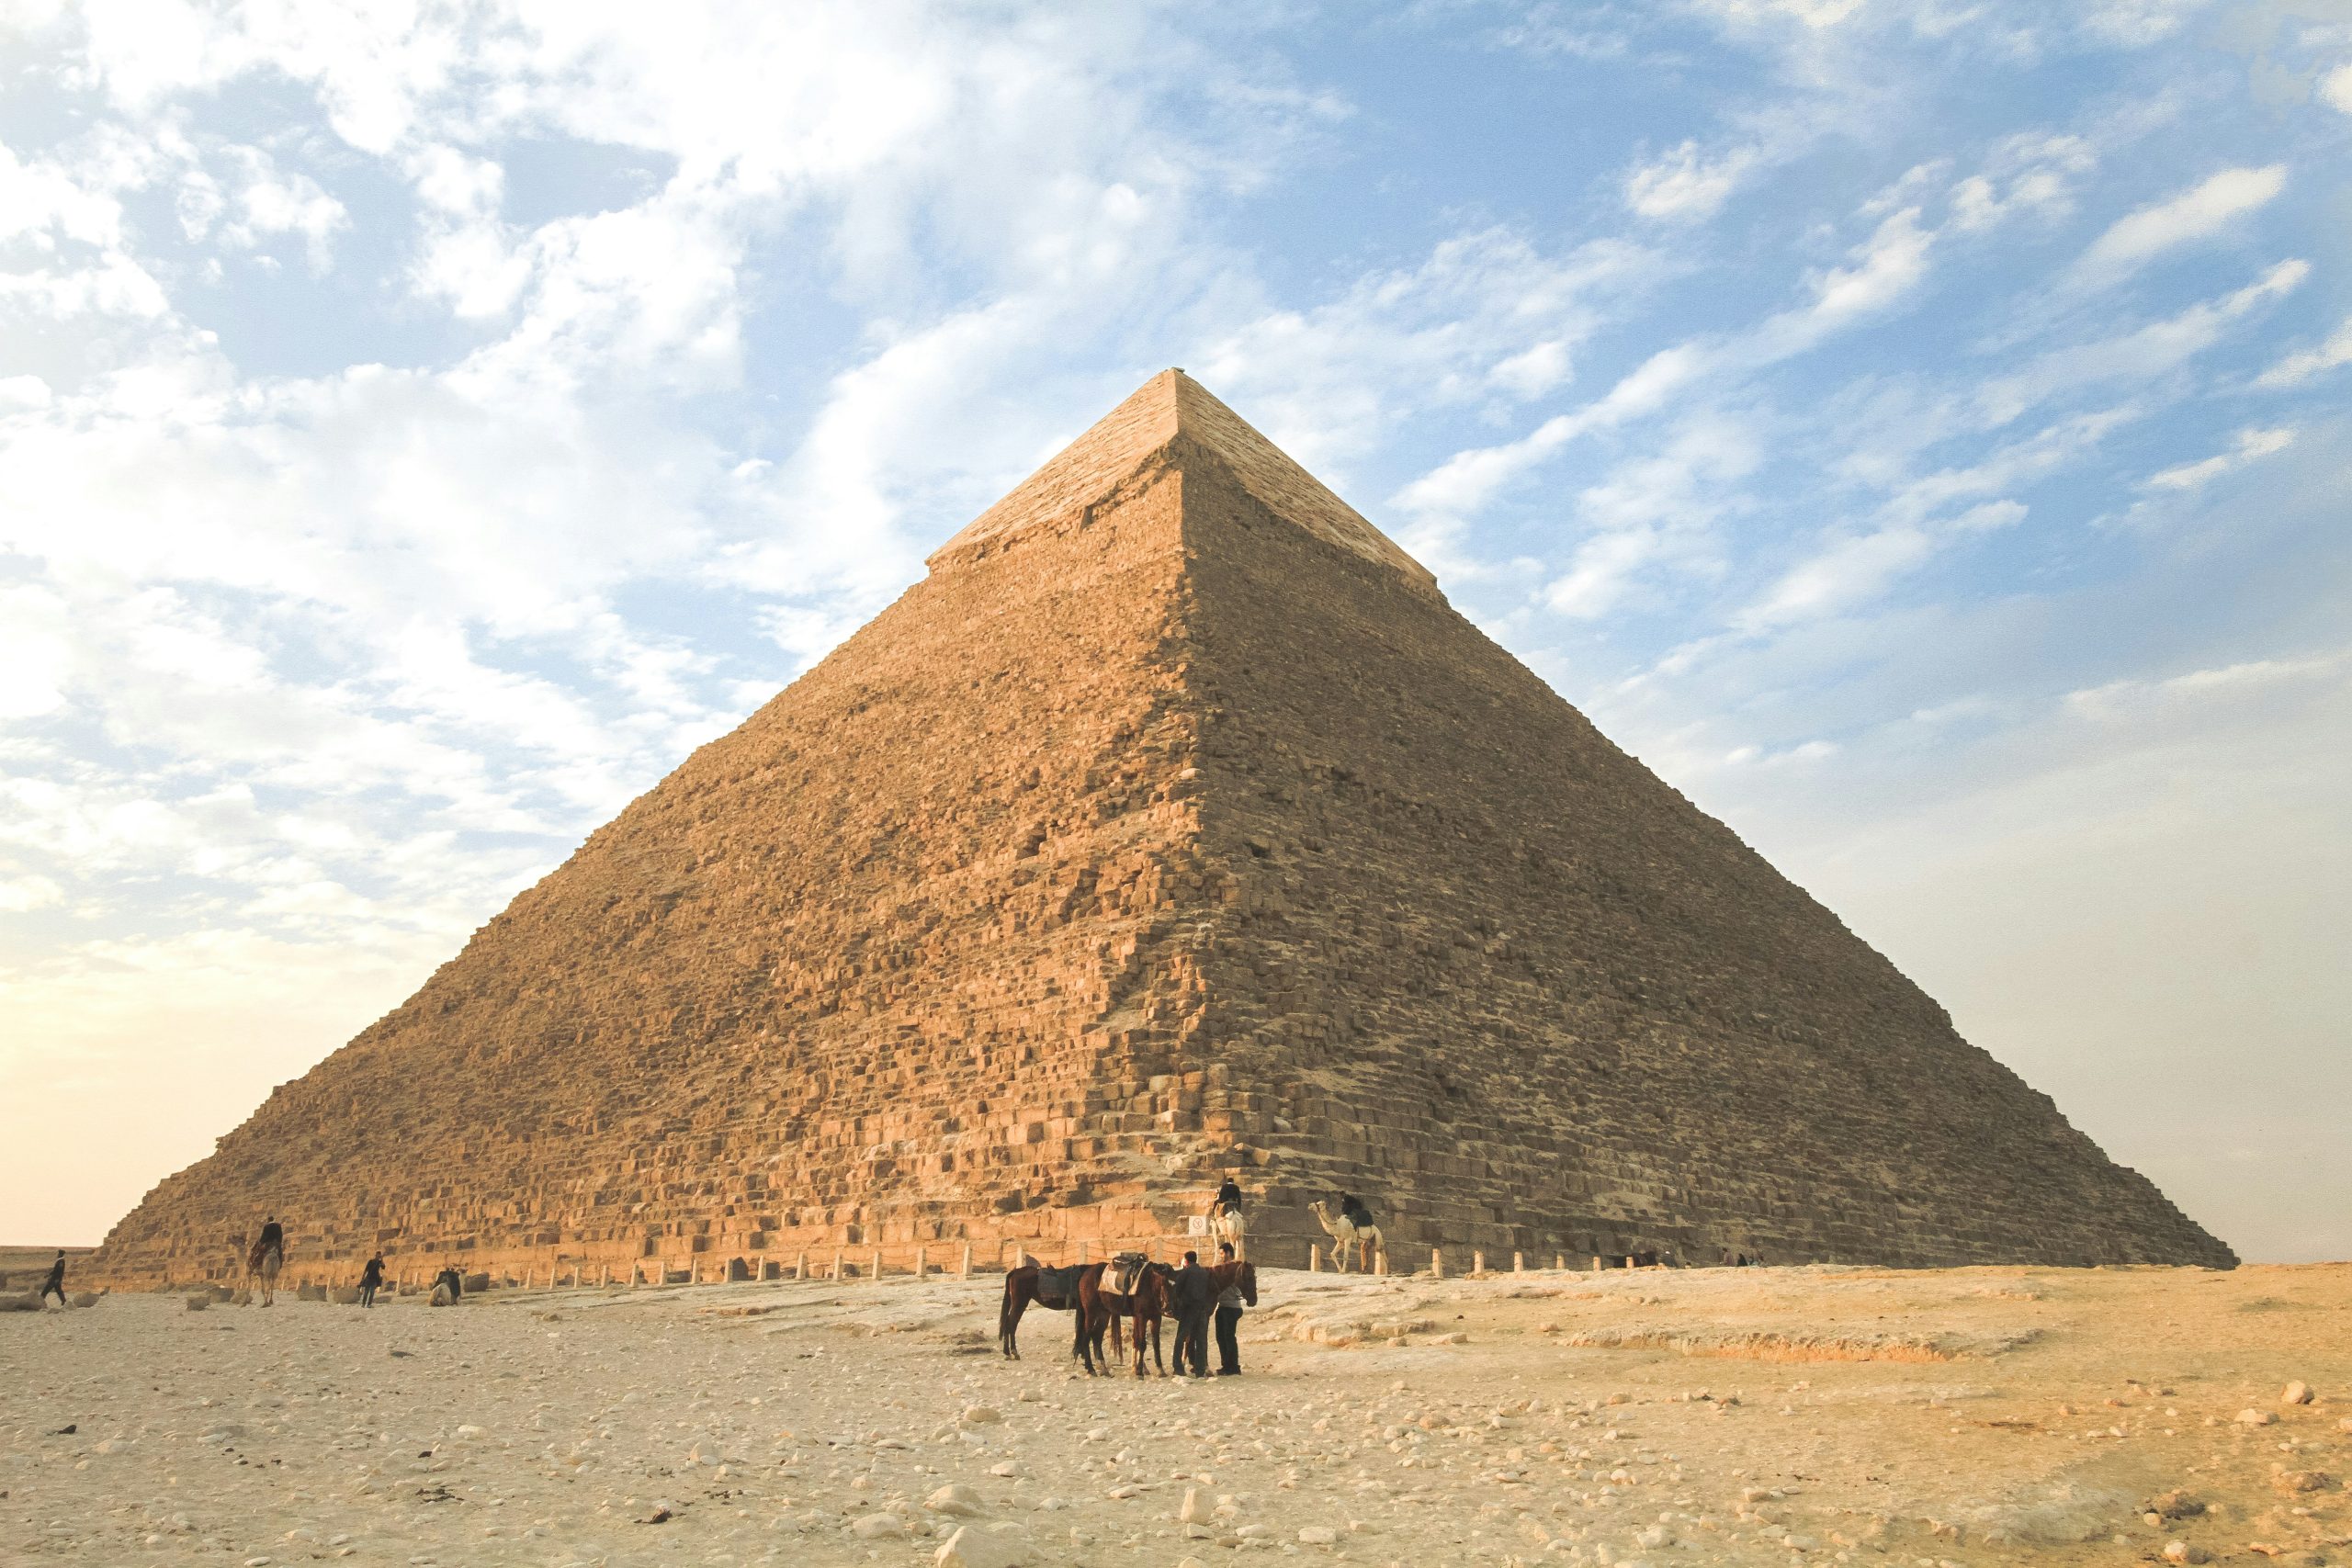 discover the ancient wonders of pyramids and explore their mystery and grandeur. uncover the secrets of these iconic structures and their significance in history.